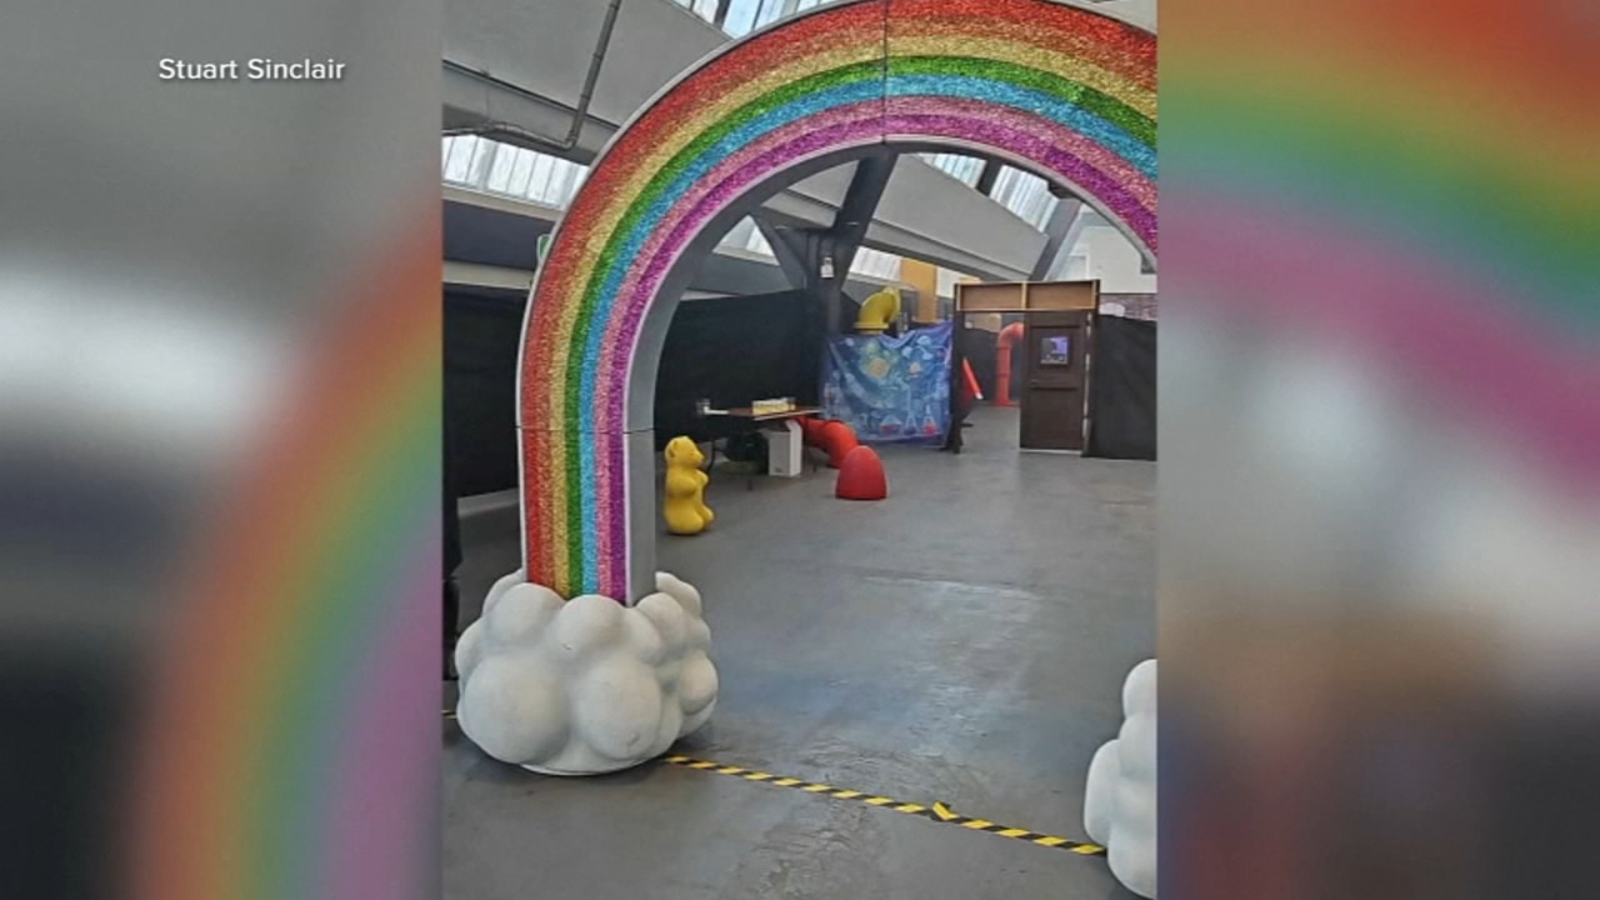 Willy Wonka immersive experience in Glasgow ends in chaos, police called to address false advertising [Video]